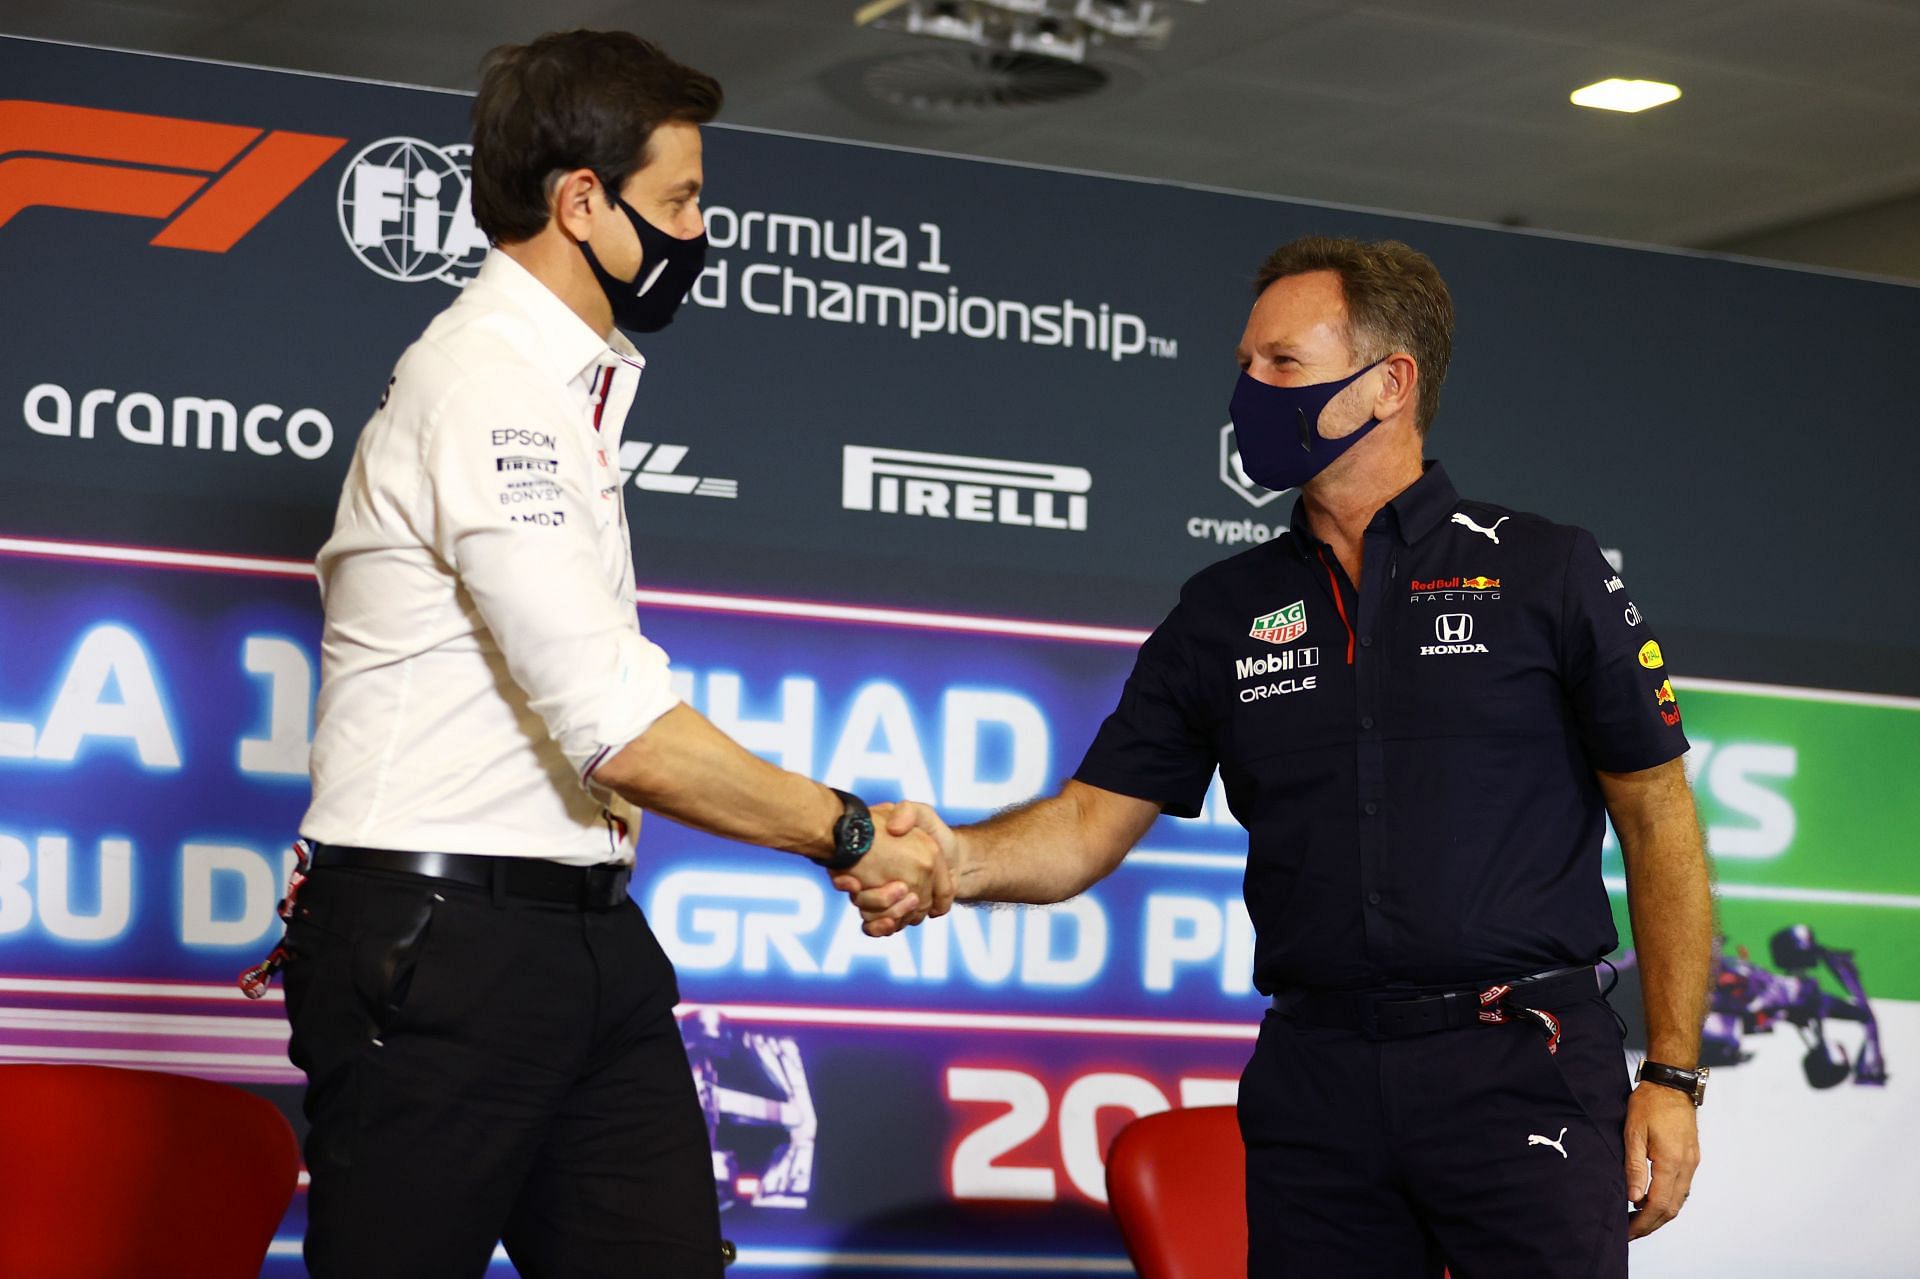 F1 Grand Prix of Abu Dhabi - Toto Wolff (left) and Christian Horner (right) ahead of the season finale